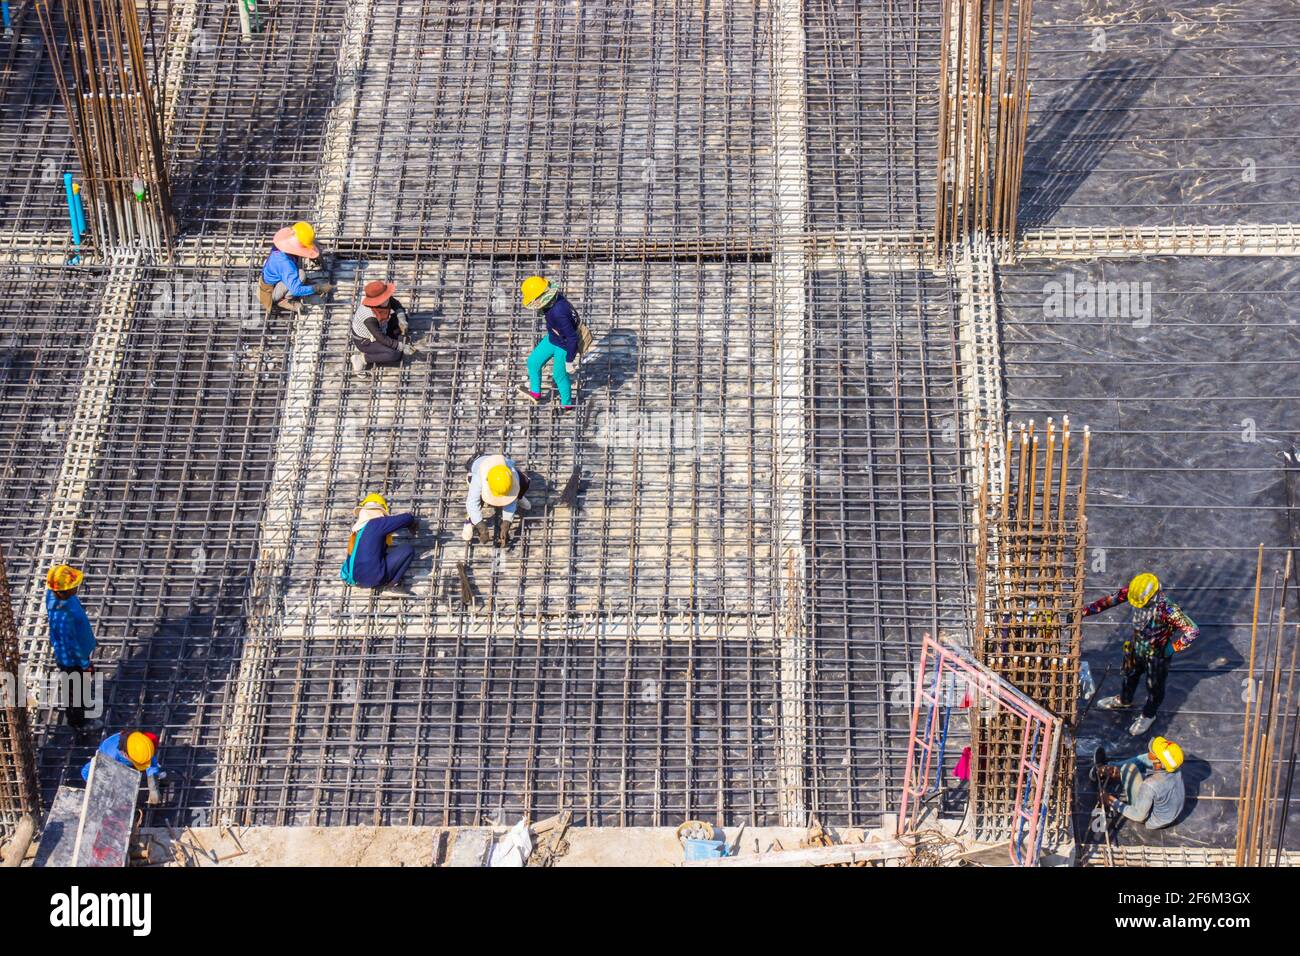 Construction workers fabricating large steel bar reinforcement bars at the construction area building site. Stock Photo